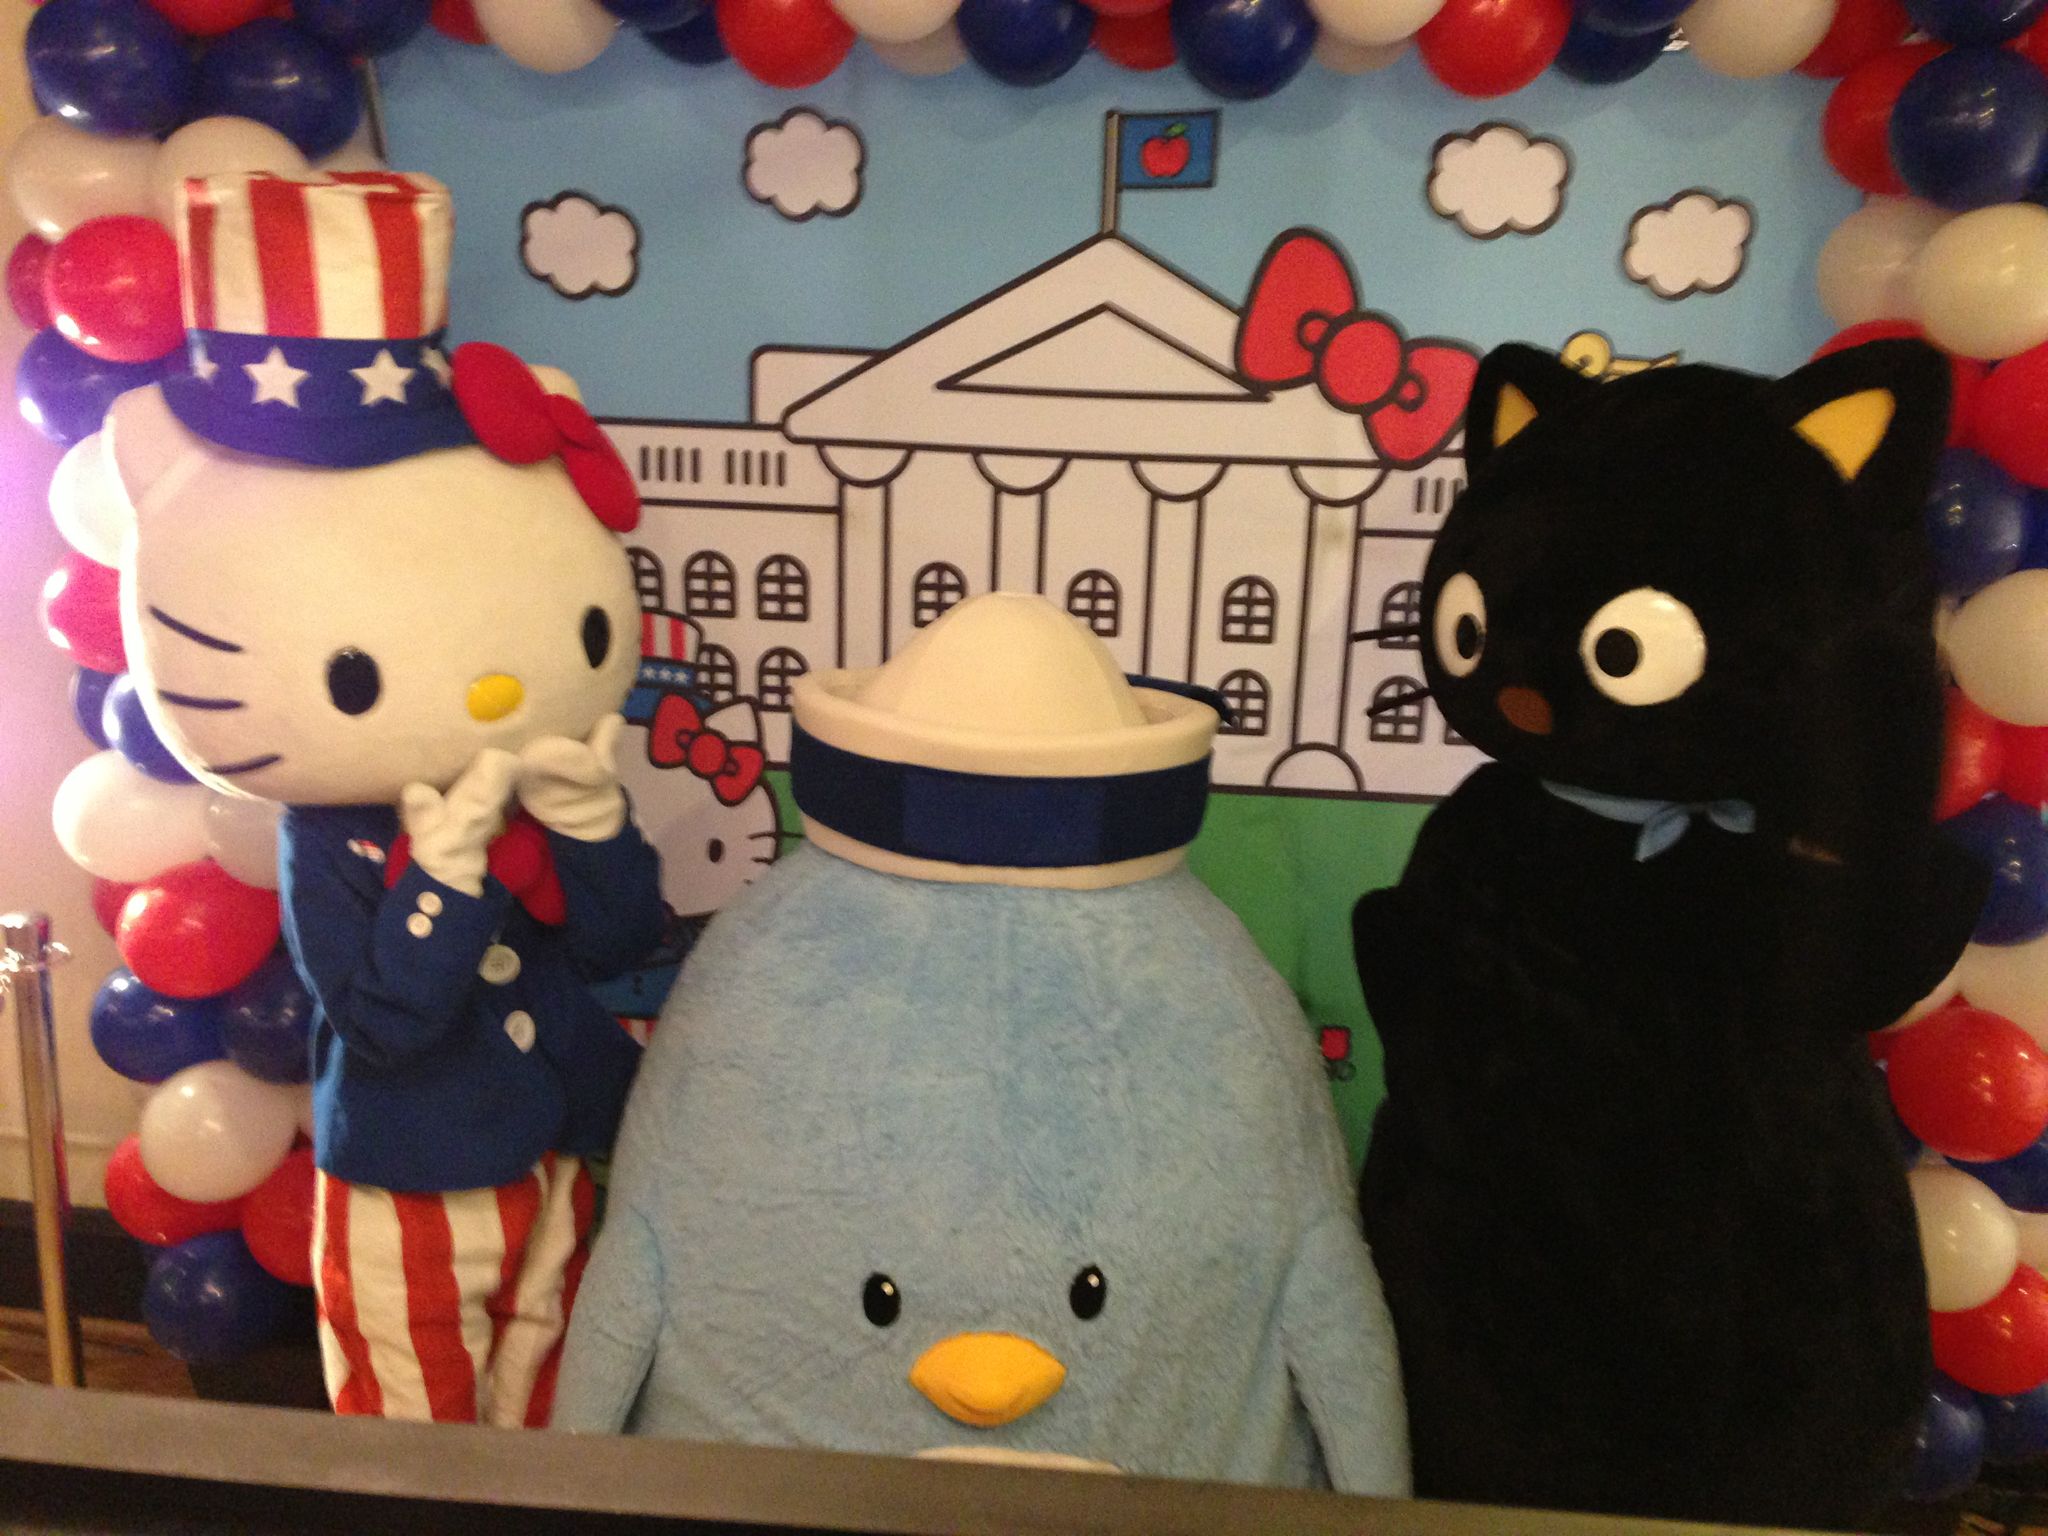 Hello Kitty 4 Prez – The Friendship Party as told by Christian Lau ...